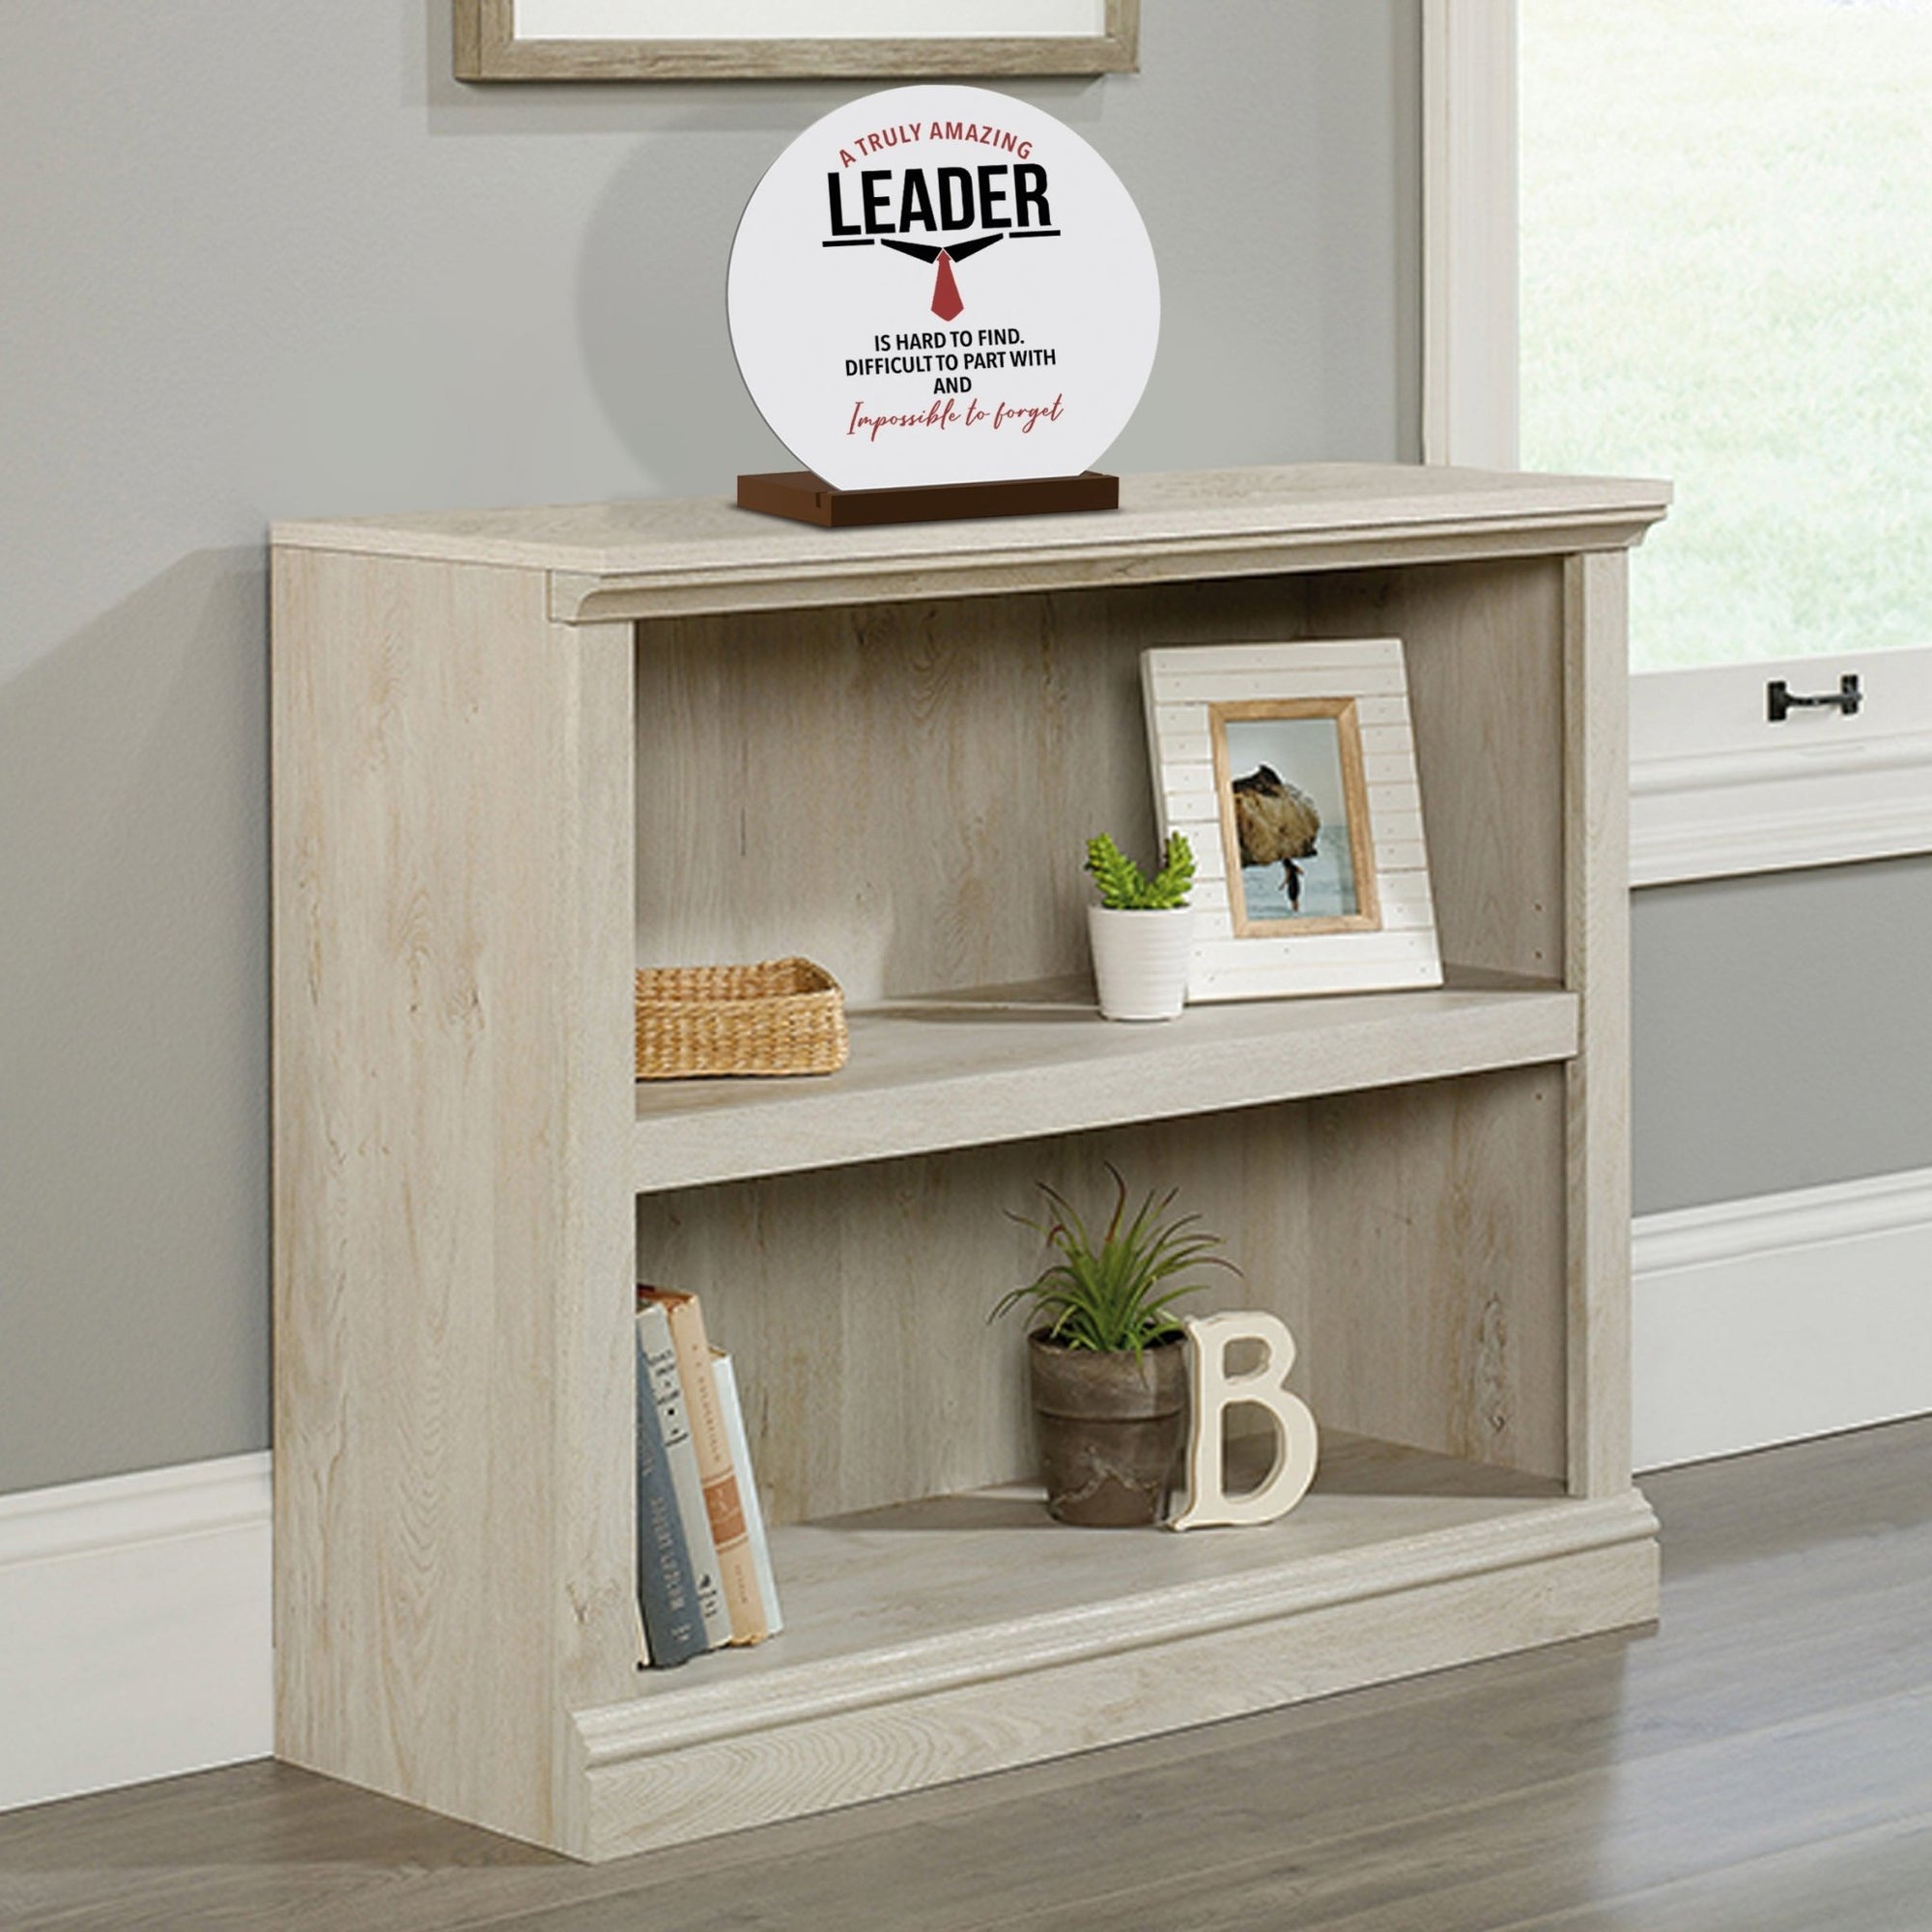 Modern White Boss Leader Round Sign With Solid Wooden Base Gift For Home Décor Ideas - A Truly Amazing Leader - LifeSong Milestones